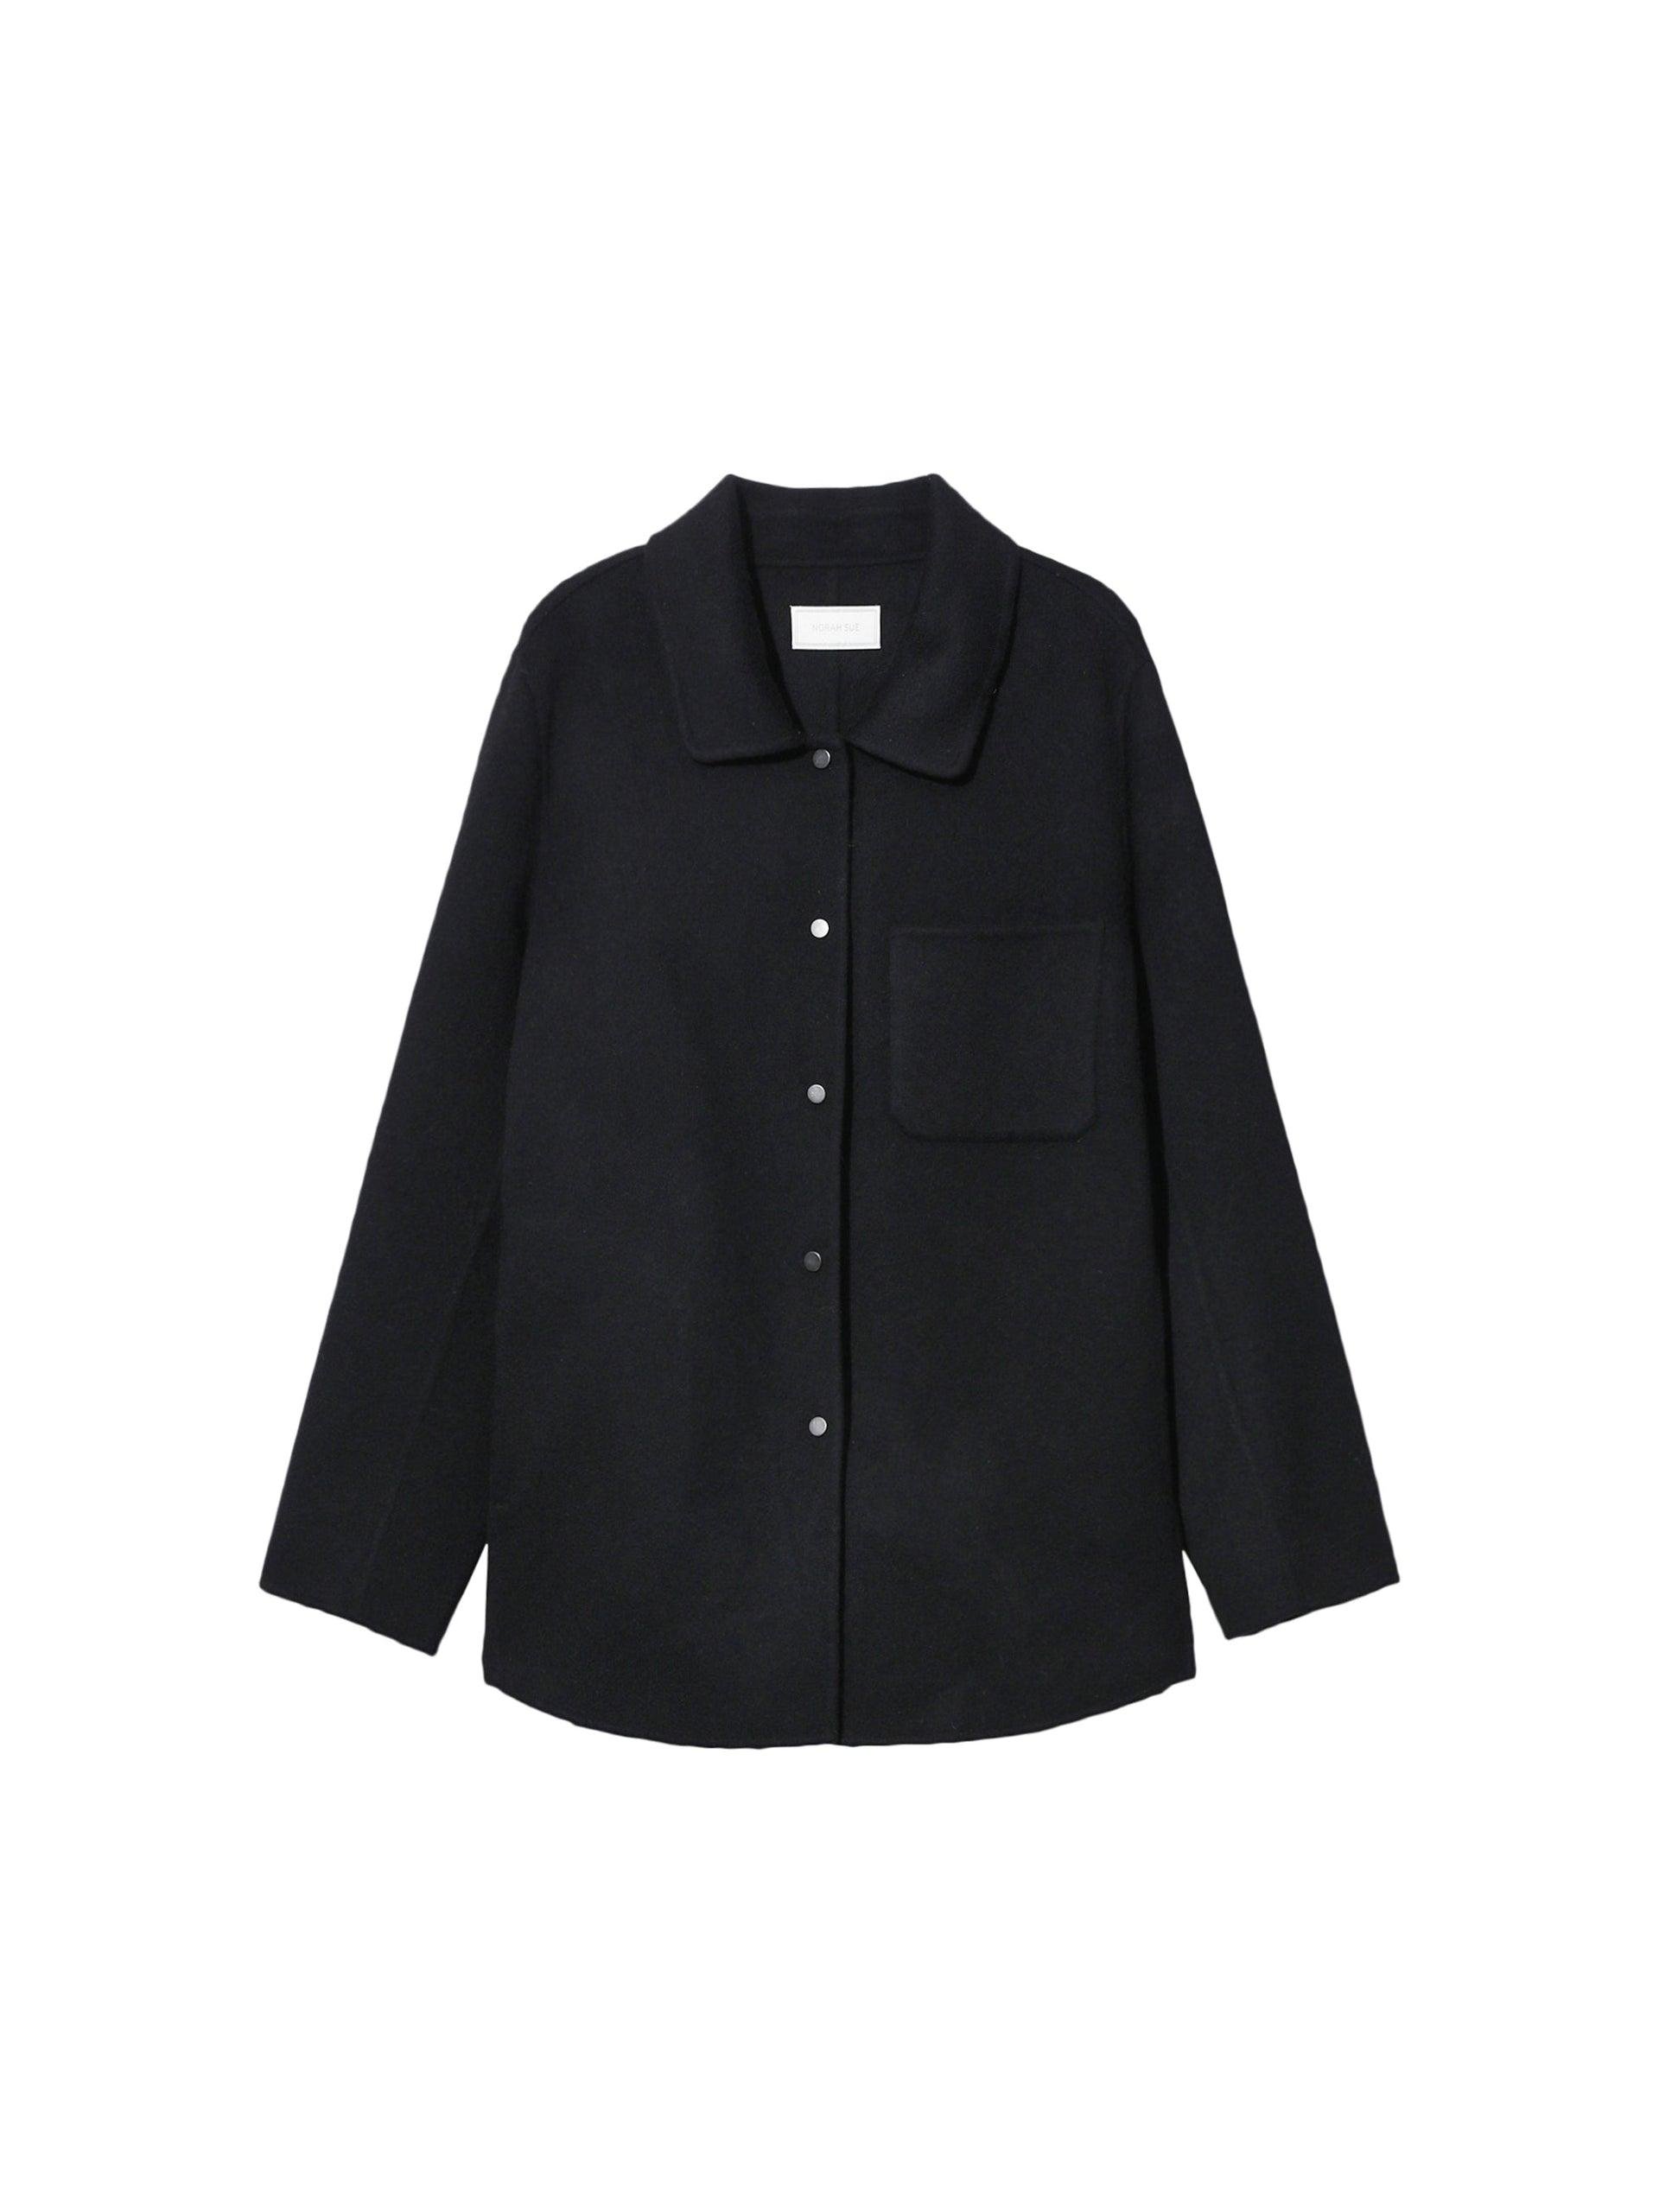 NORAH SUE Pure Cashmere Overshirt Jacket by COCKTAIL